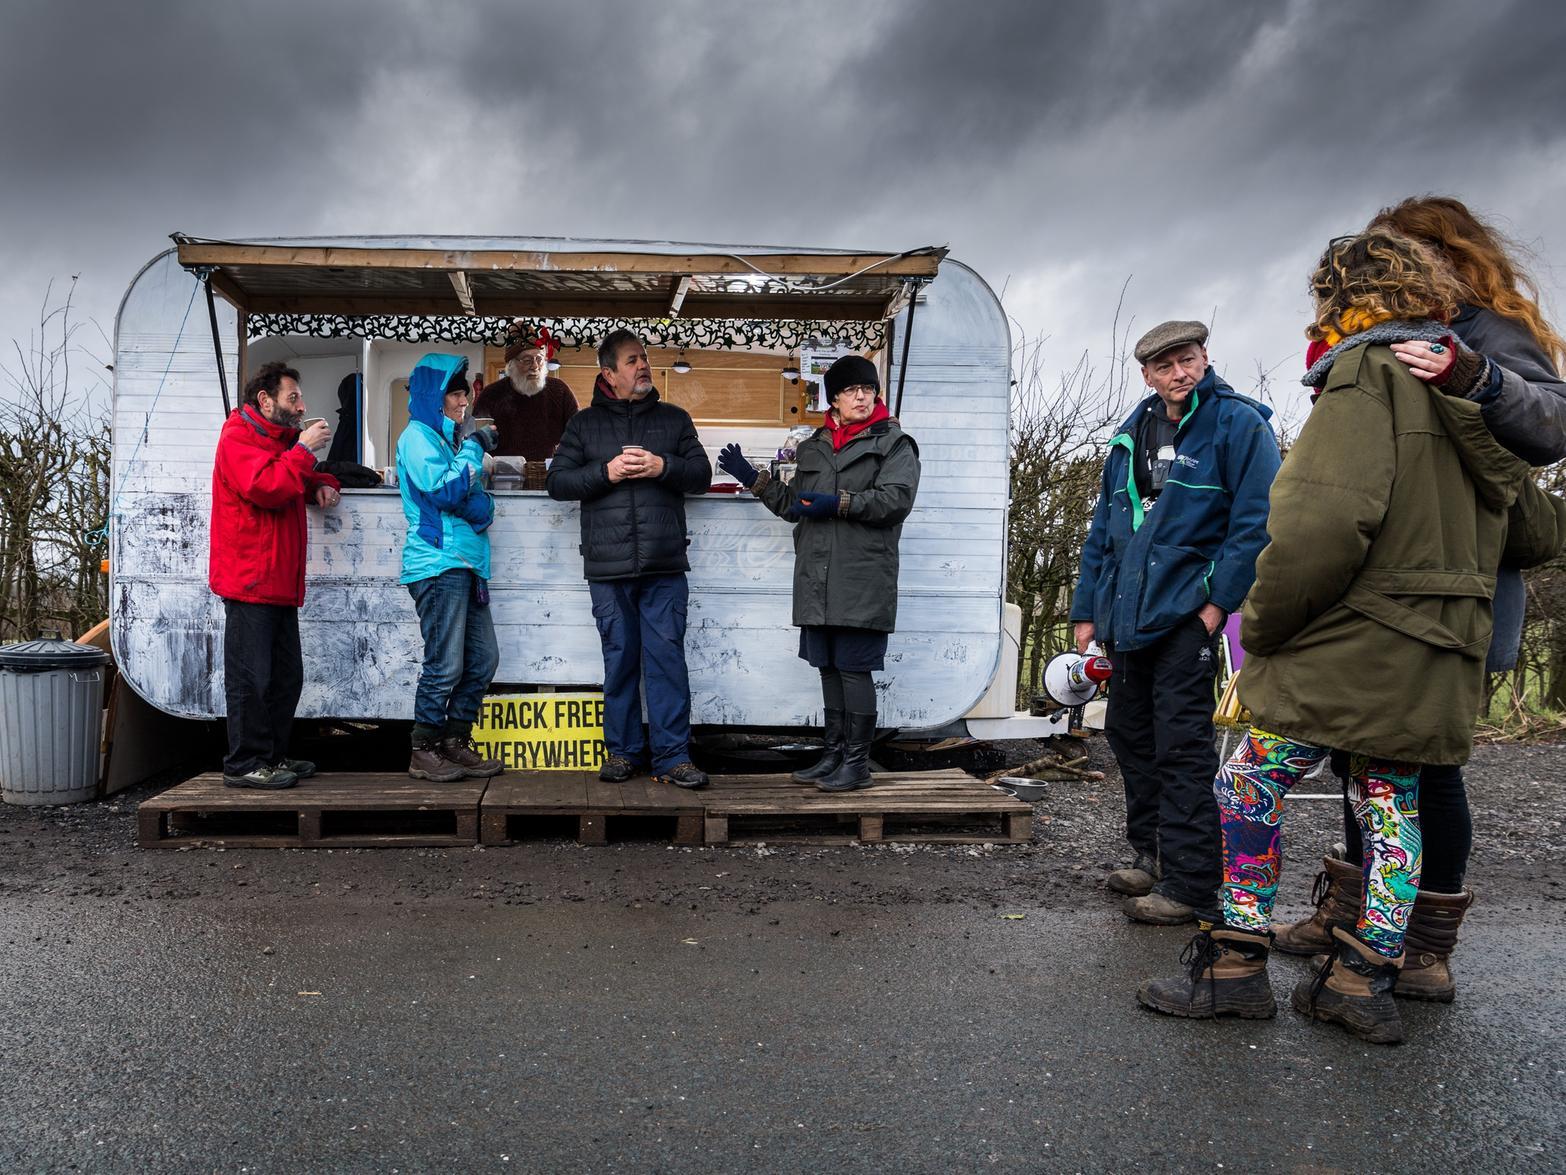 The refreshment caravan near the entrance of the Third Energy fracking site.